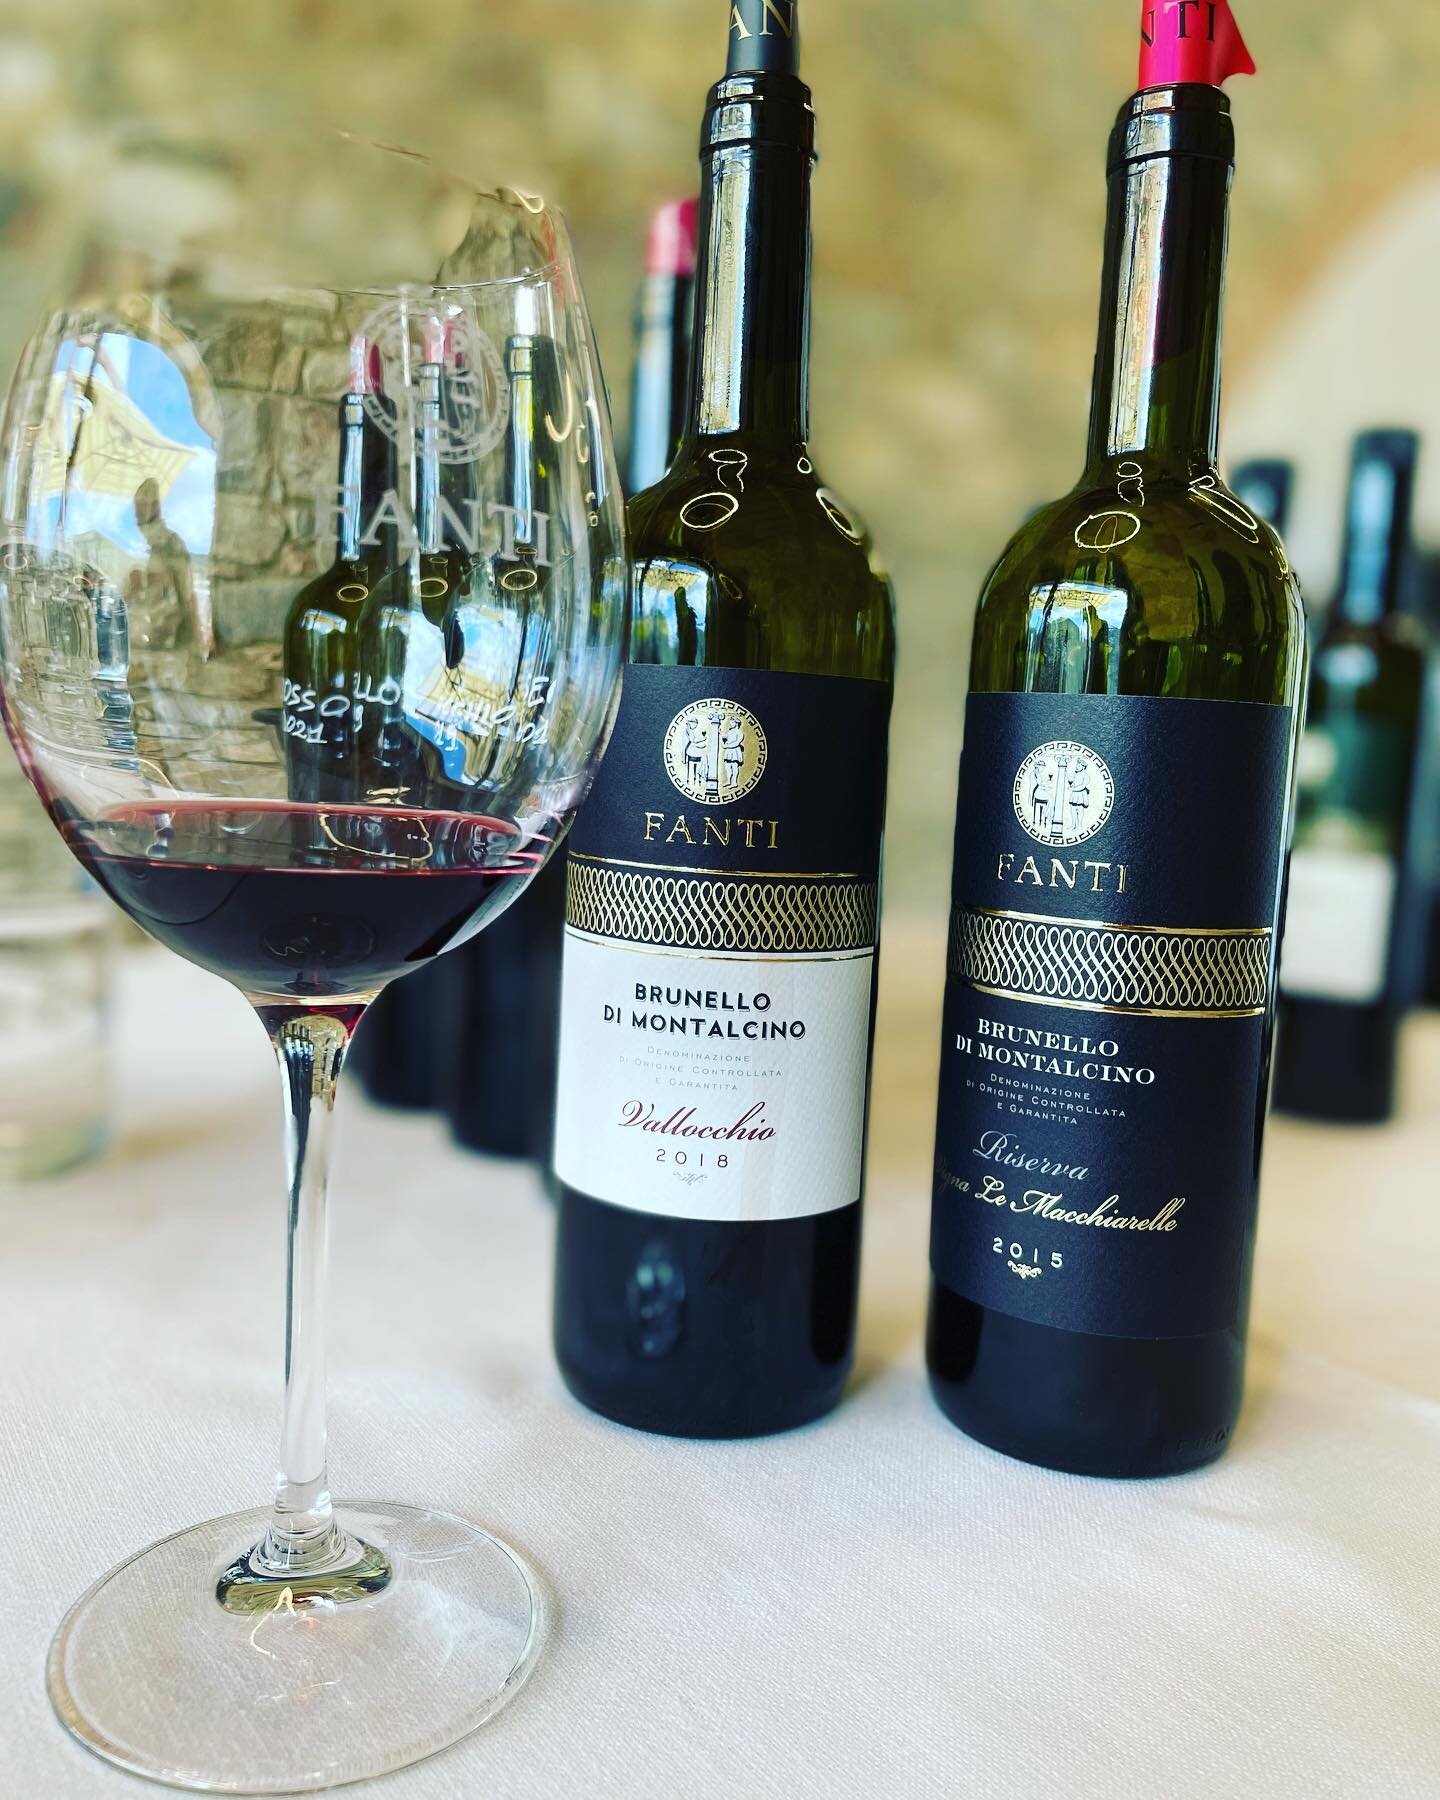 Throwback to the fantastic visit of @tenuta_fanti !

The property has been in the Fanti family for over two centuries: one can only imagine the pride and love Filippo and daughter Elisa have for their land in #montalcino

To protect their cherished t